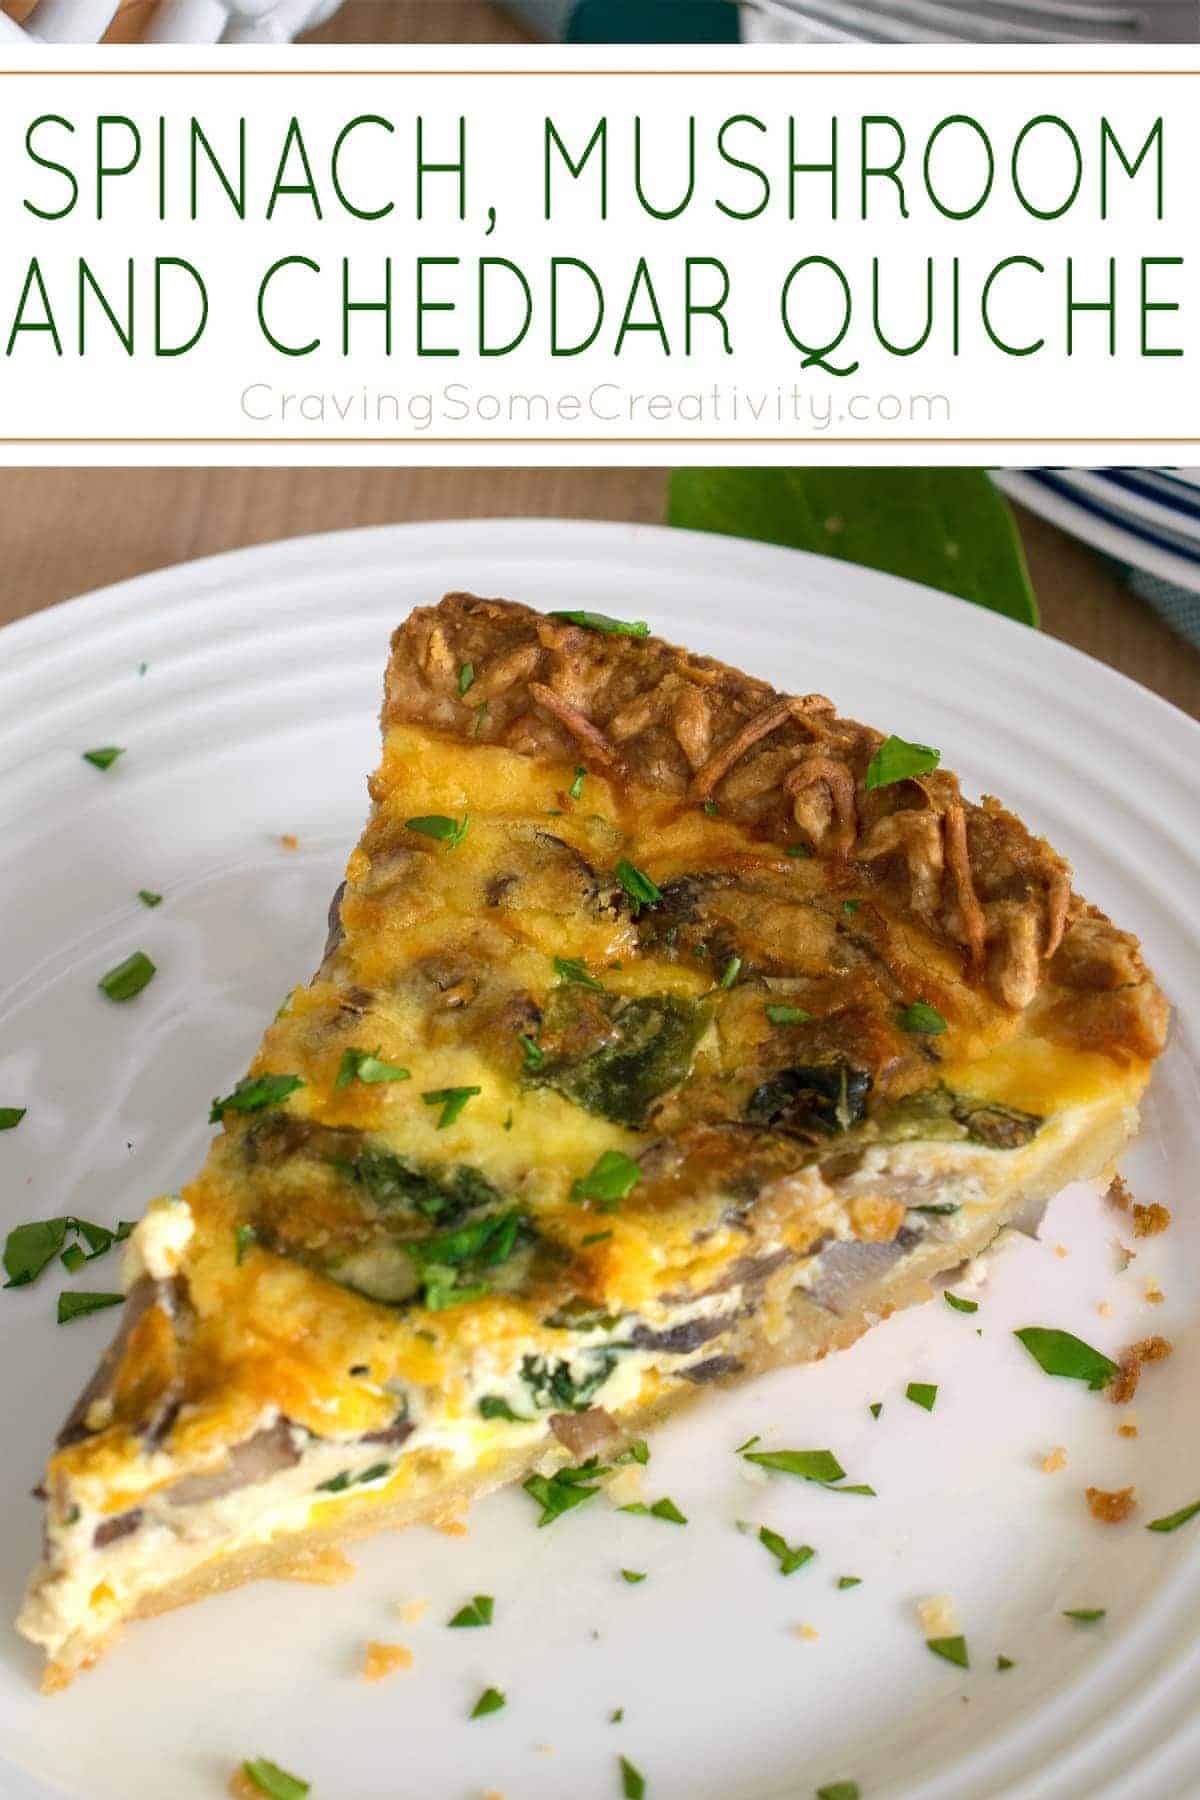 Slice of Spinach Mushroom Quiche with crust and fresh herbs on white plate with title.